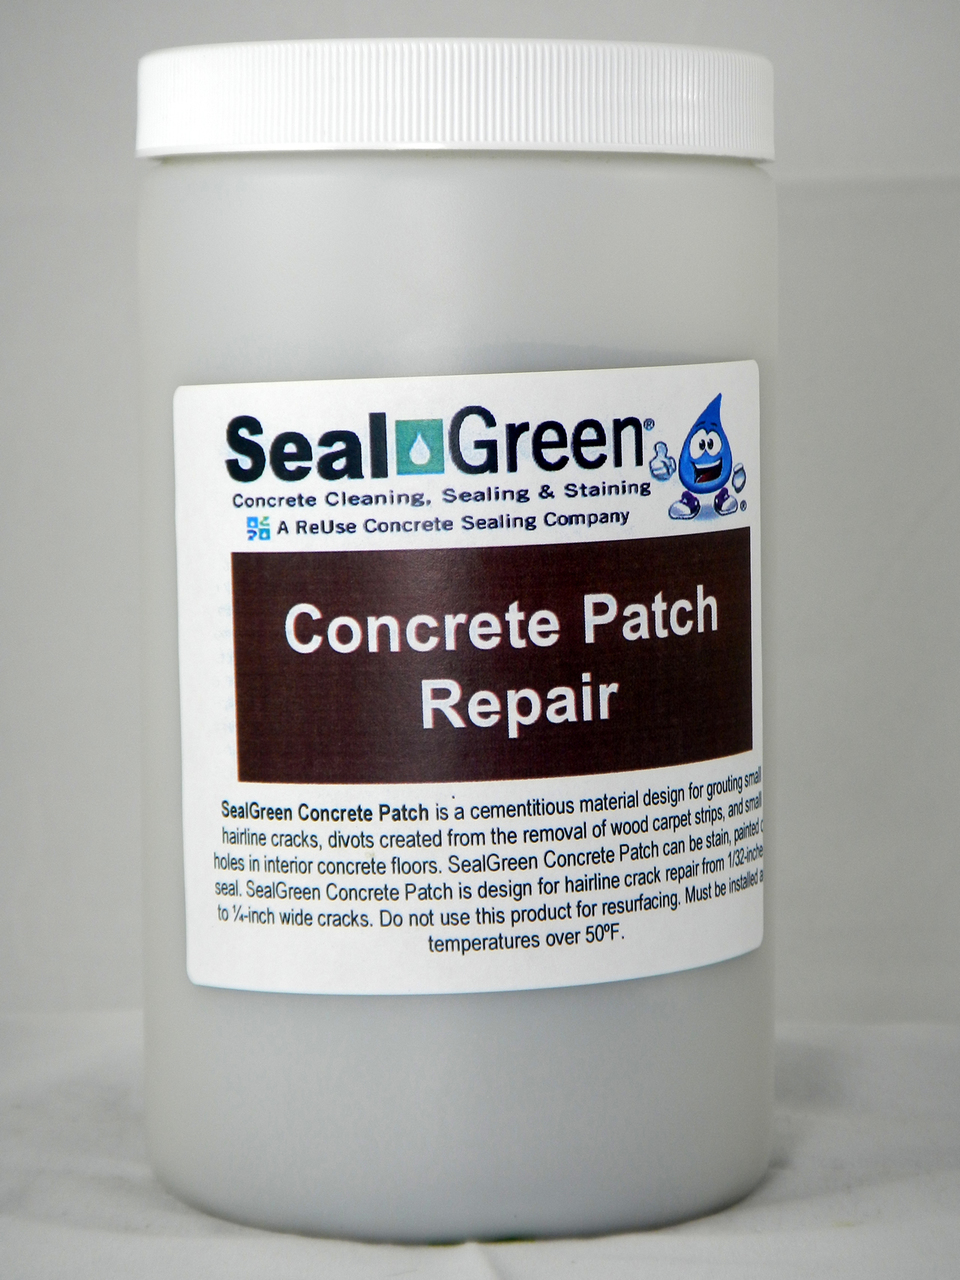 How long does it take SealGreen Concrete Patch to cure before staining?